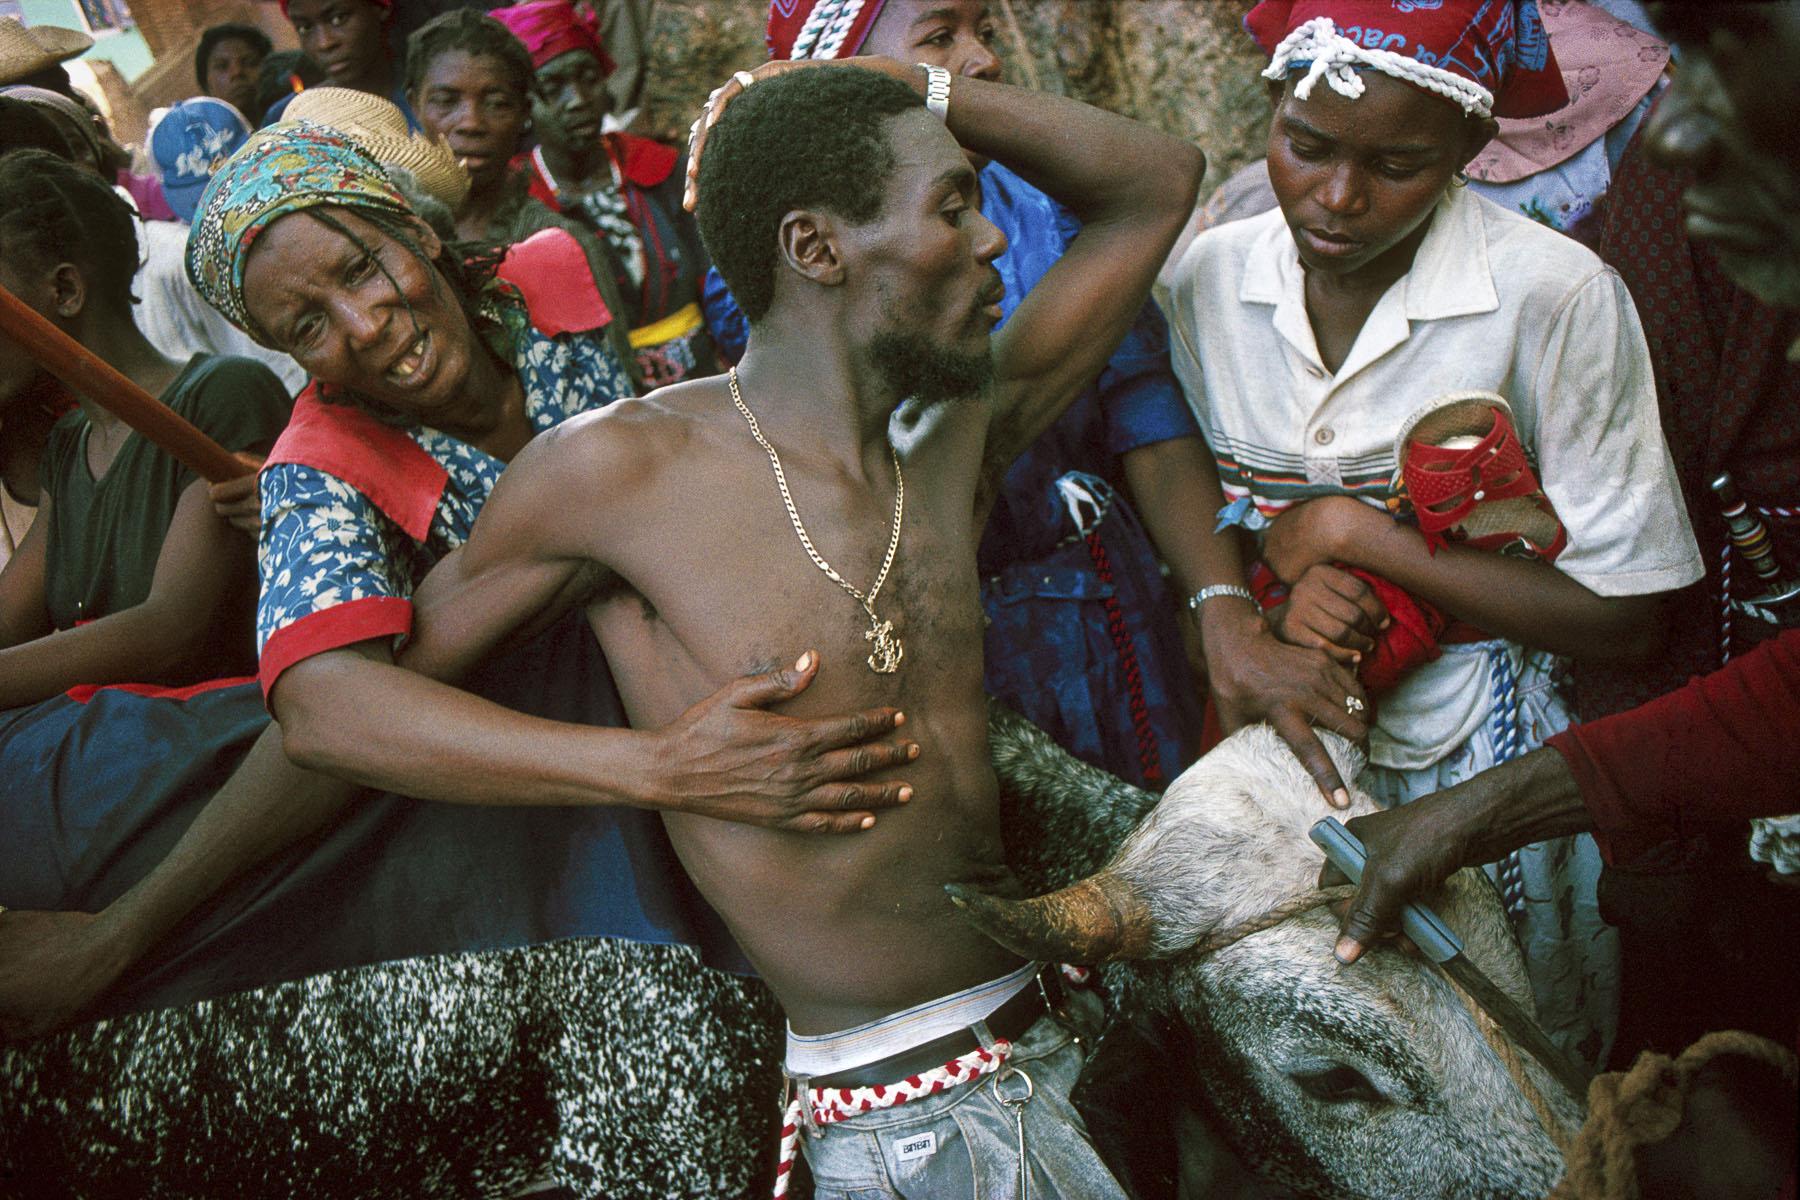 A community of farmers from the Artibonite preparing to sacrifice a bull to the loa (spirit) Ogou Feray during the annual pilgrimage in July 1995